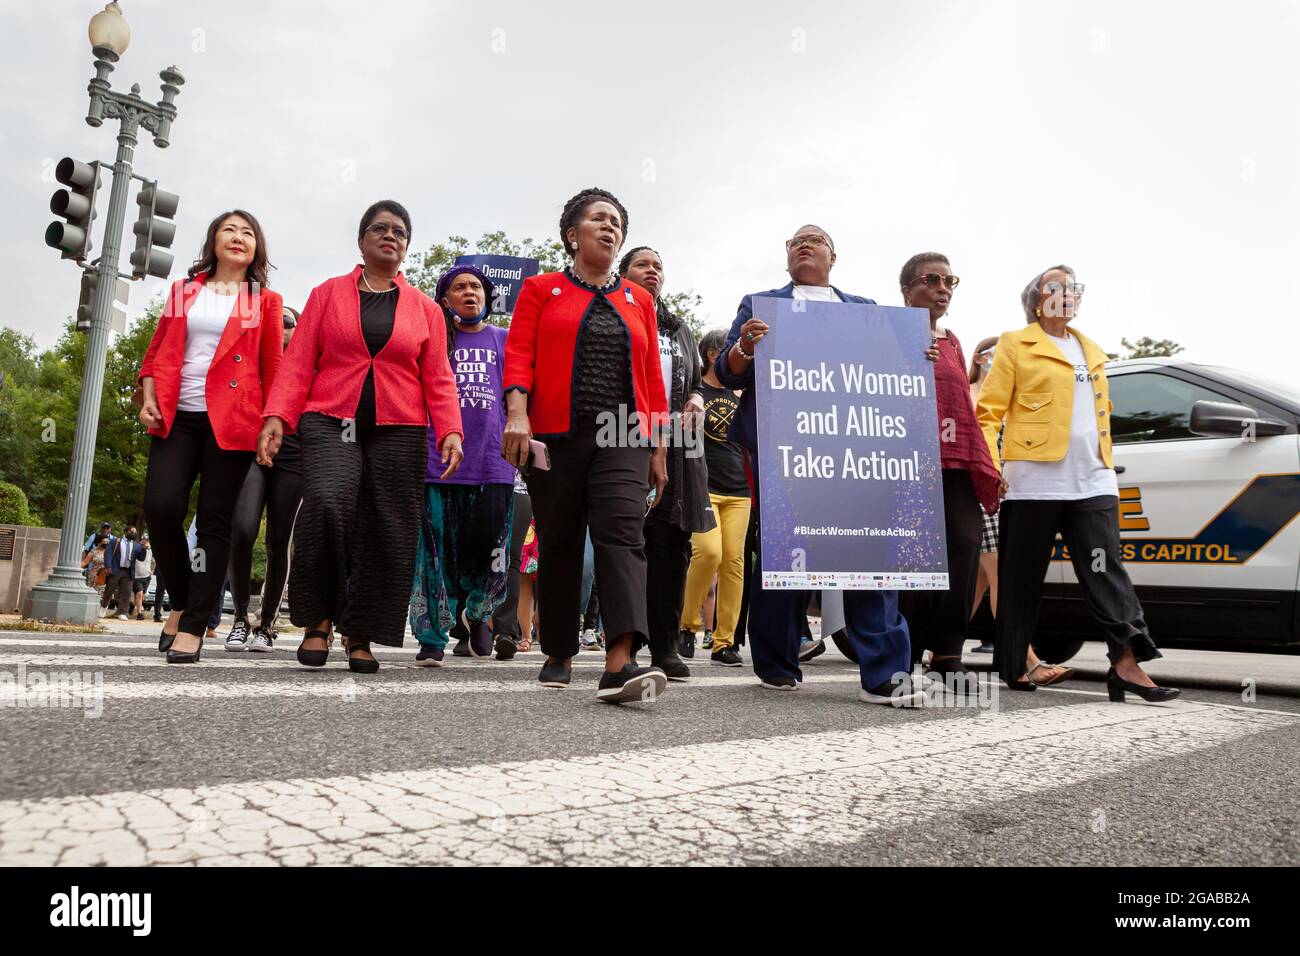 Washington, DC, USA. 29th July, 2021. Pictured: Black Women lead a short march to the Hart Senate Building for a civil disobedience action at a voting rights speak-out event hosted by the National Coalition on Black Civic Participation. Left to right: Rev. Hyepin Im, Rev. Dr. Barbara Williams-Skinner, Faya Toure, Congresswoman Sheila Jackson Lee (D-TX), Rev. Leslie Copeland-Tune, Melanie Campbell, Cora Masters Barry, and Dr. Johnnetta Cole. Credit: Allison Bailey/Alamy Live News Stock Photo